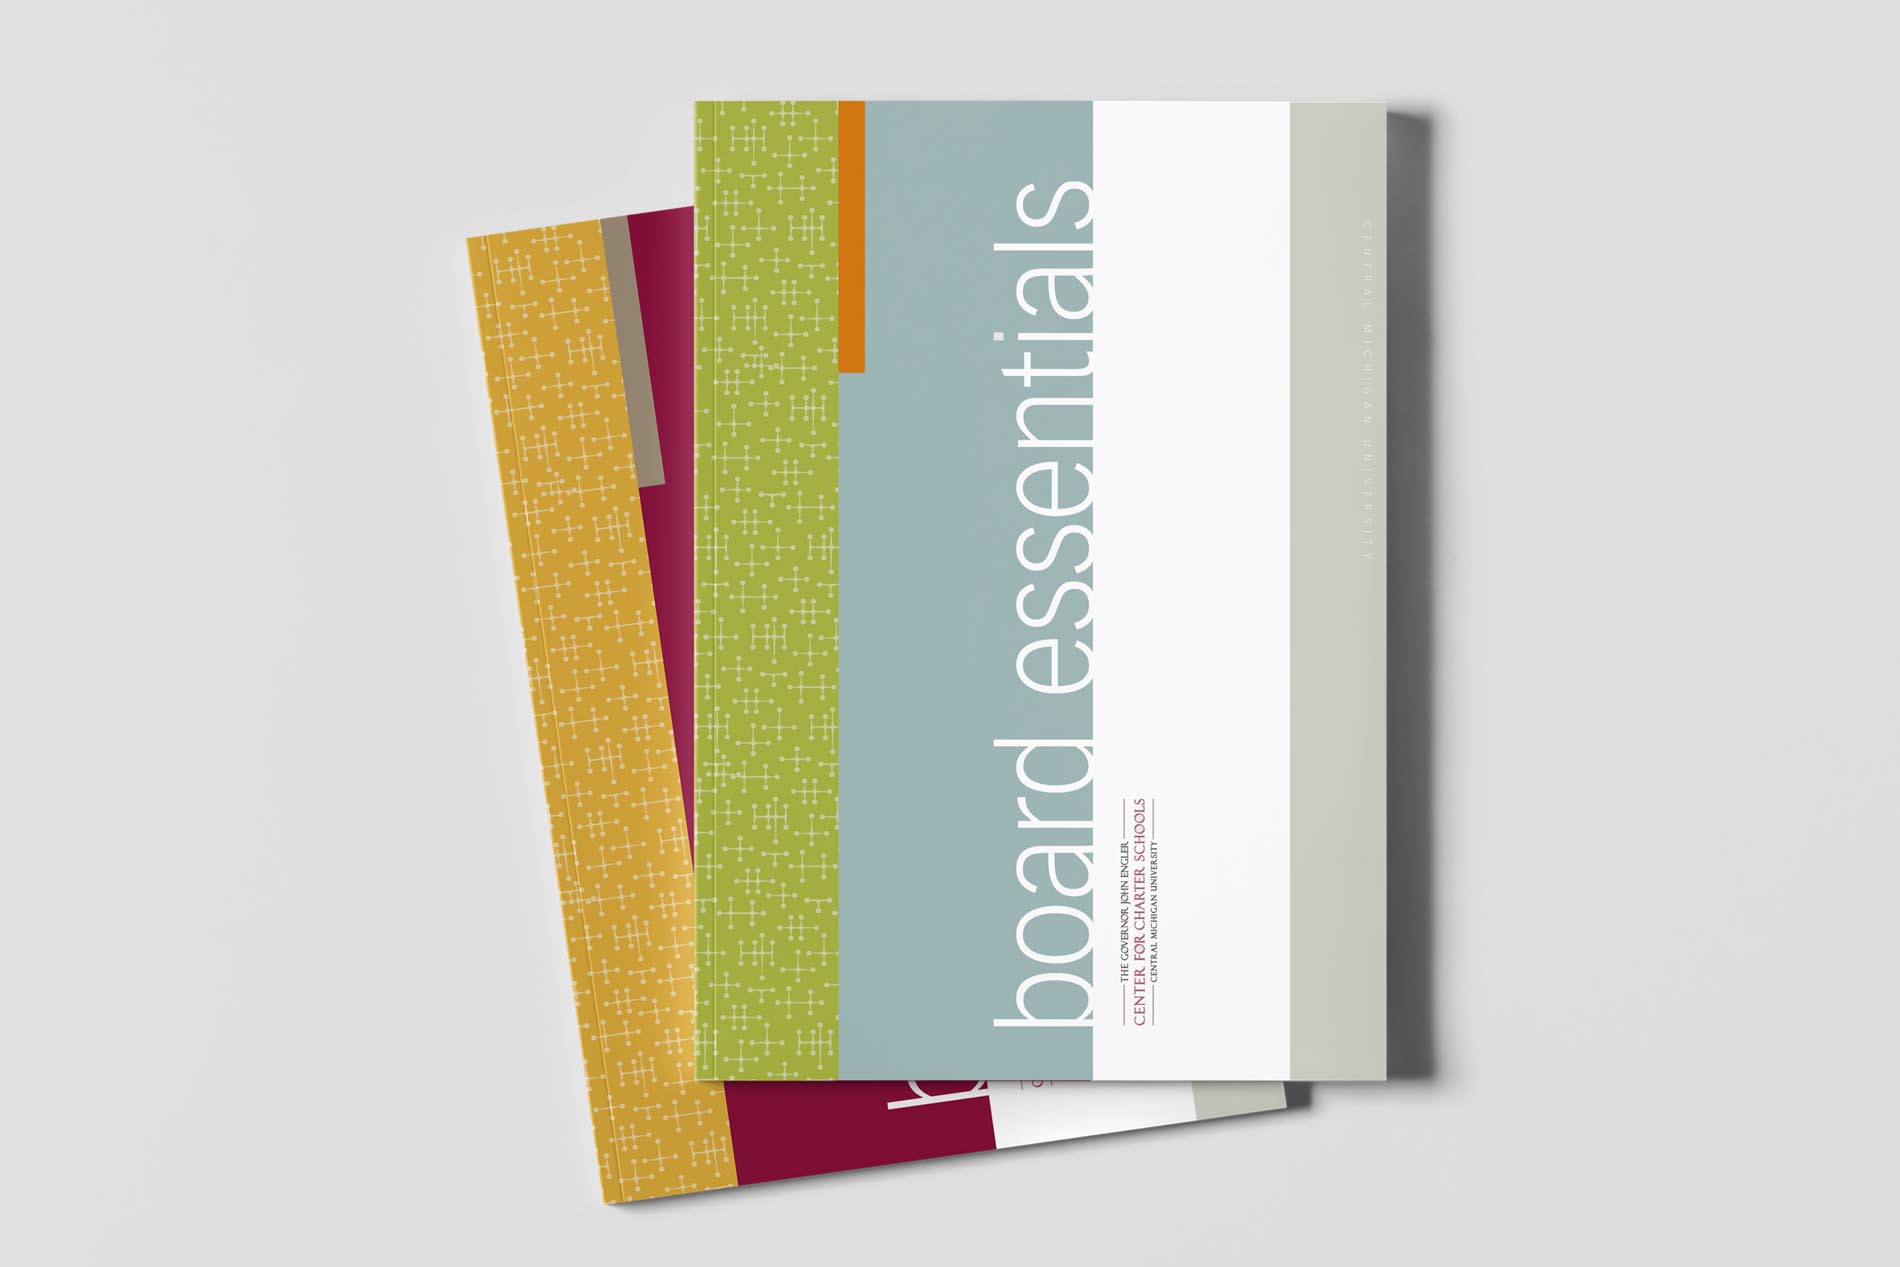 ip Charter Schools Board Essentials guidebook cover mockup by Design Direction